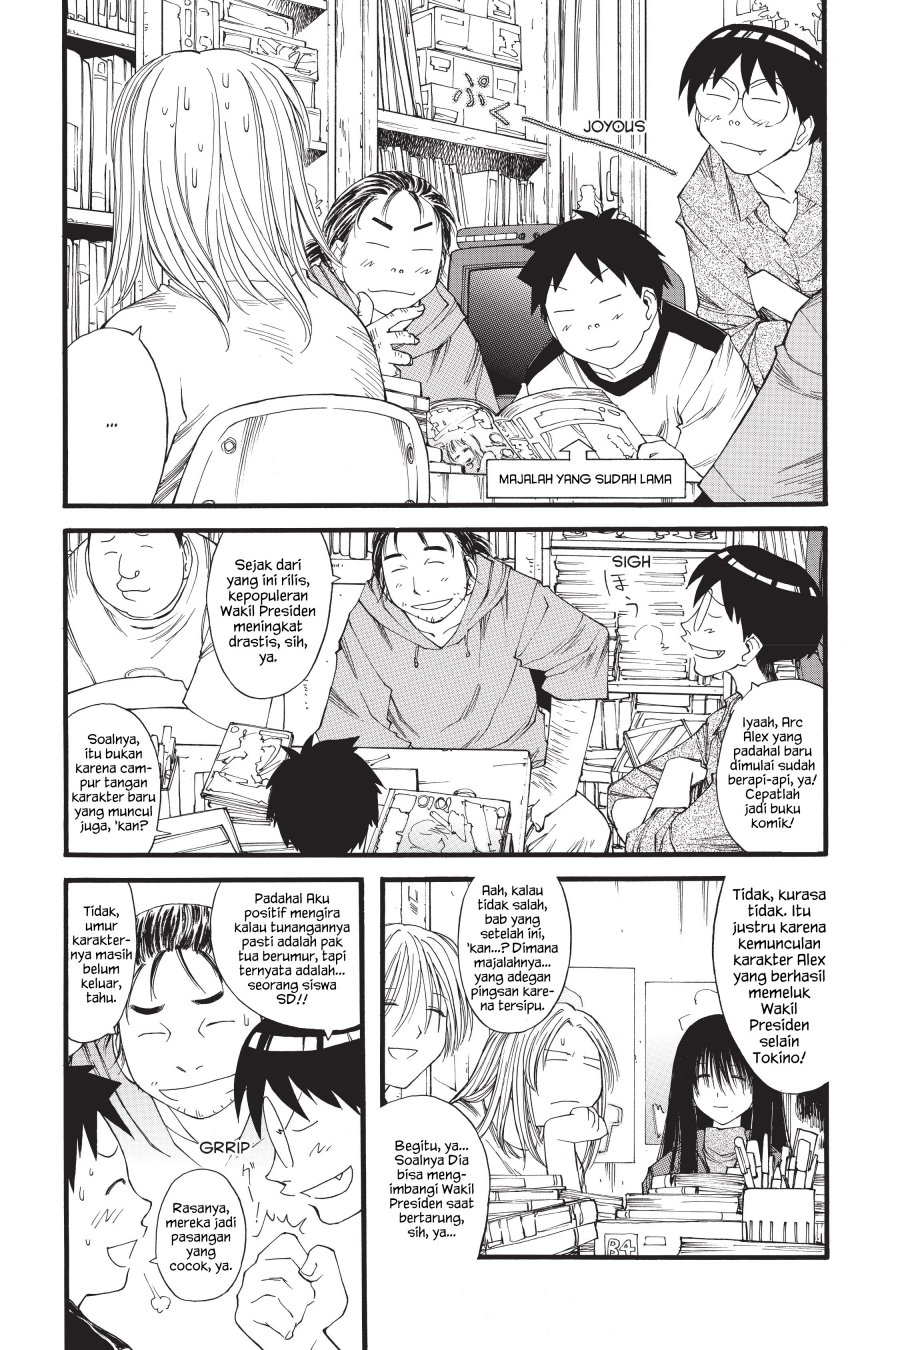 Genshiken – The Society for the Study of Modern Visual Culture Chapter 18 Image 6